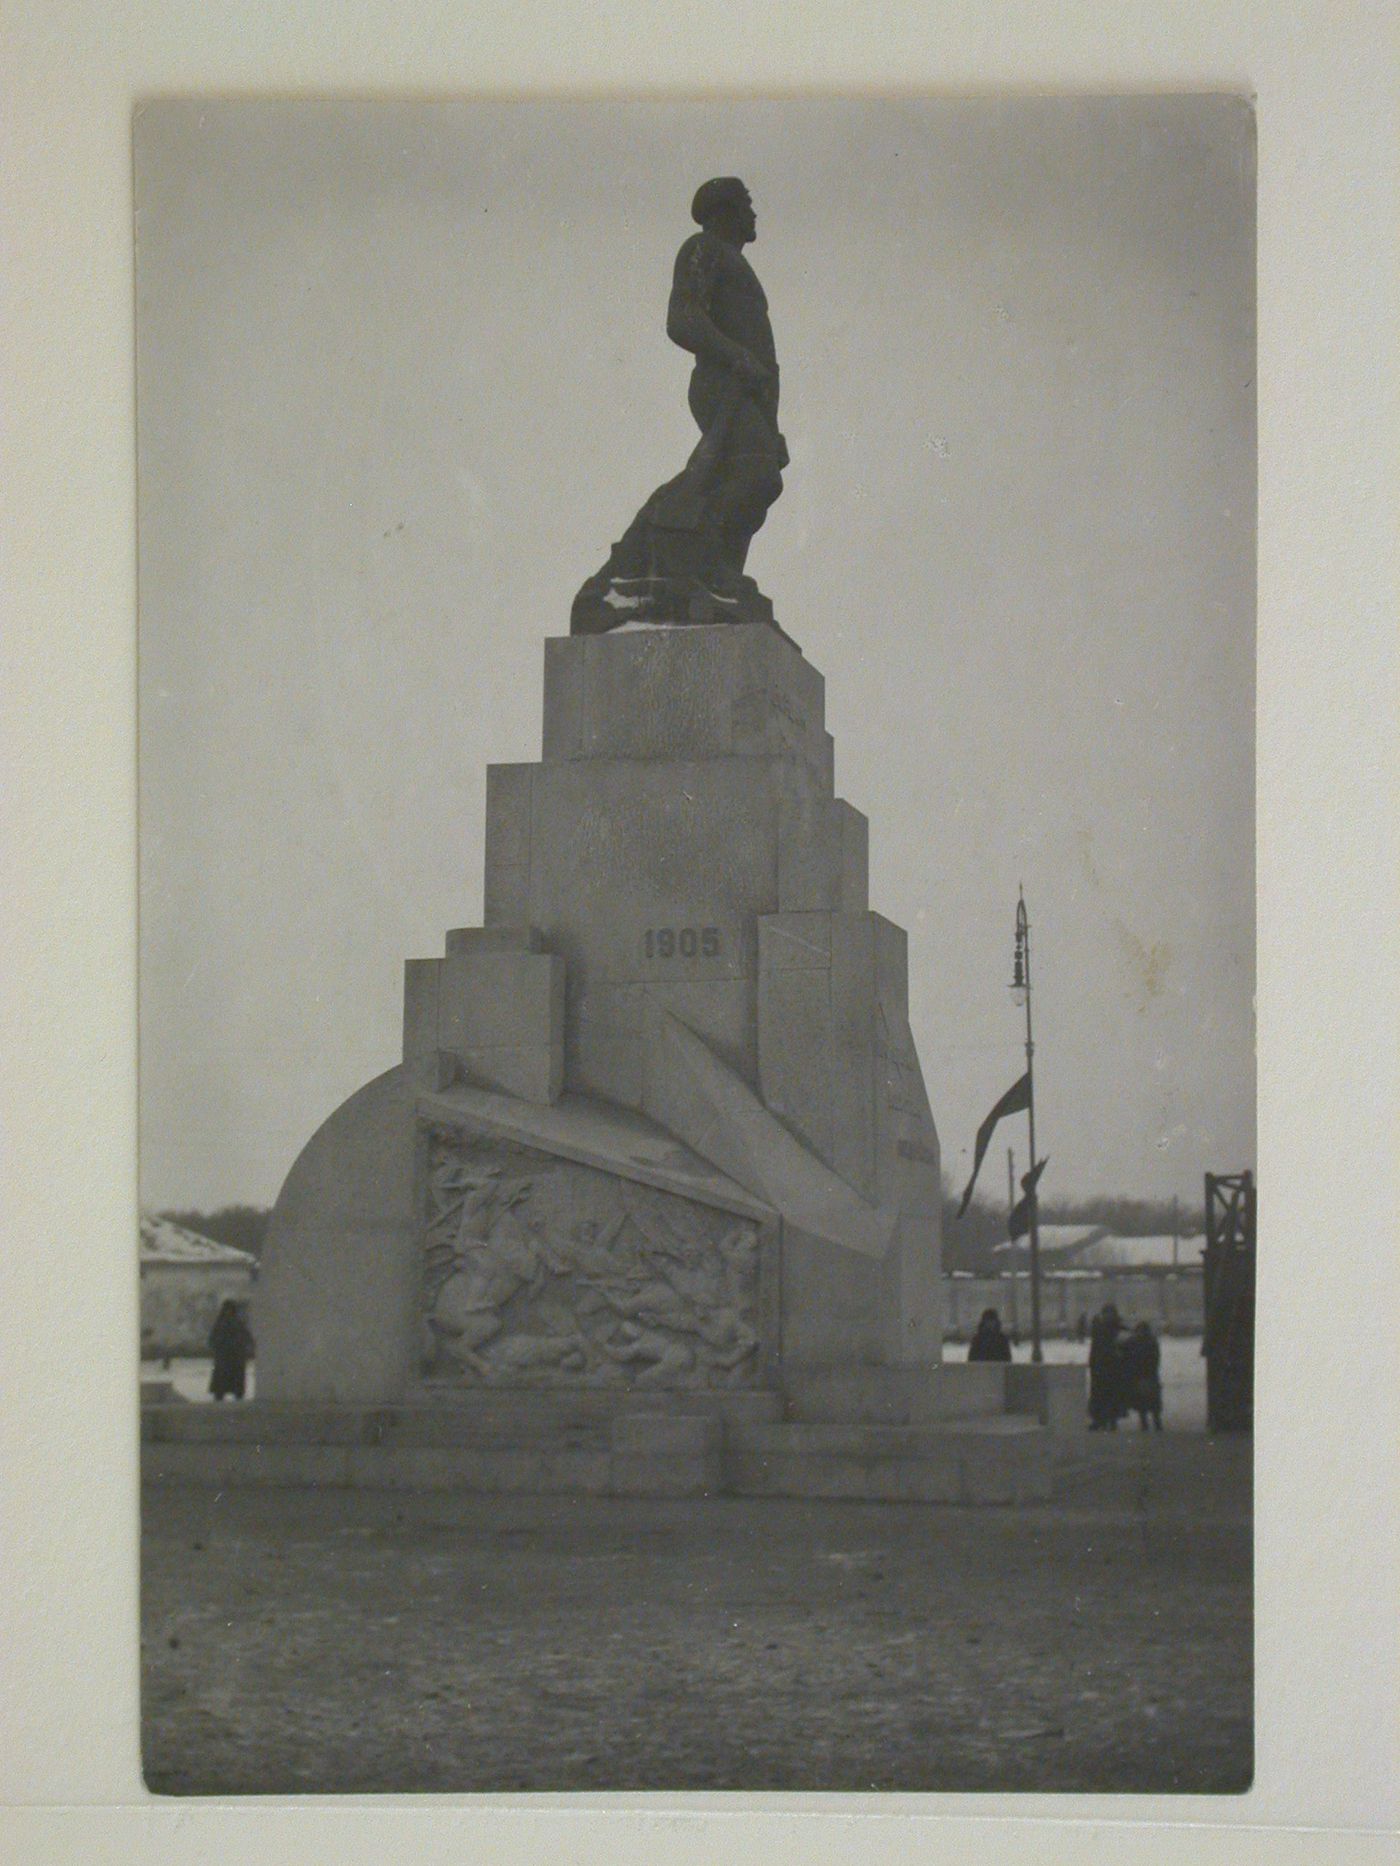 View of a monument to the Fighters of the Revolution, Saratov, Soviet Union (now in Russia)